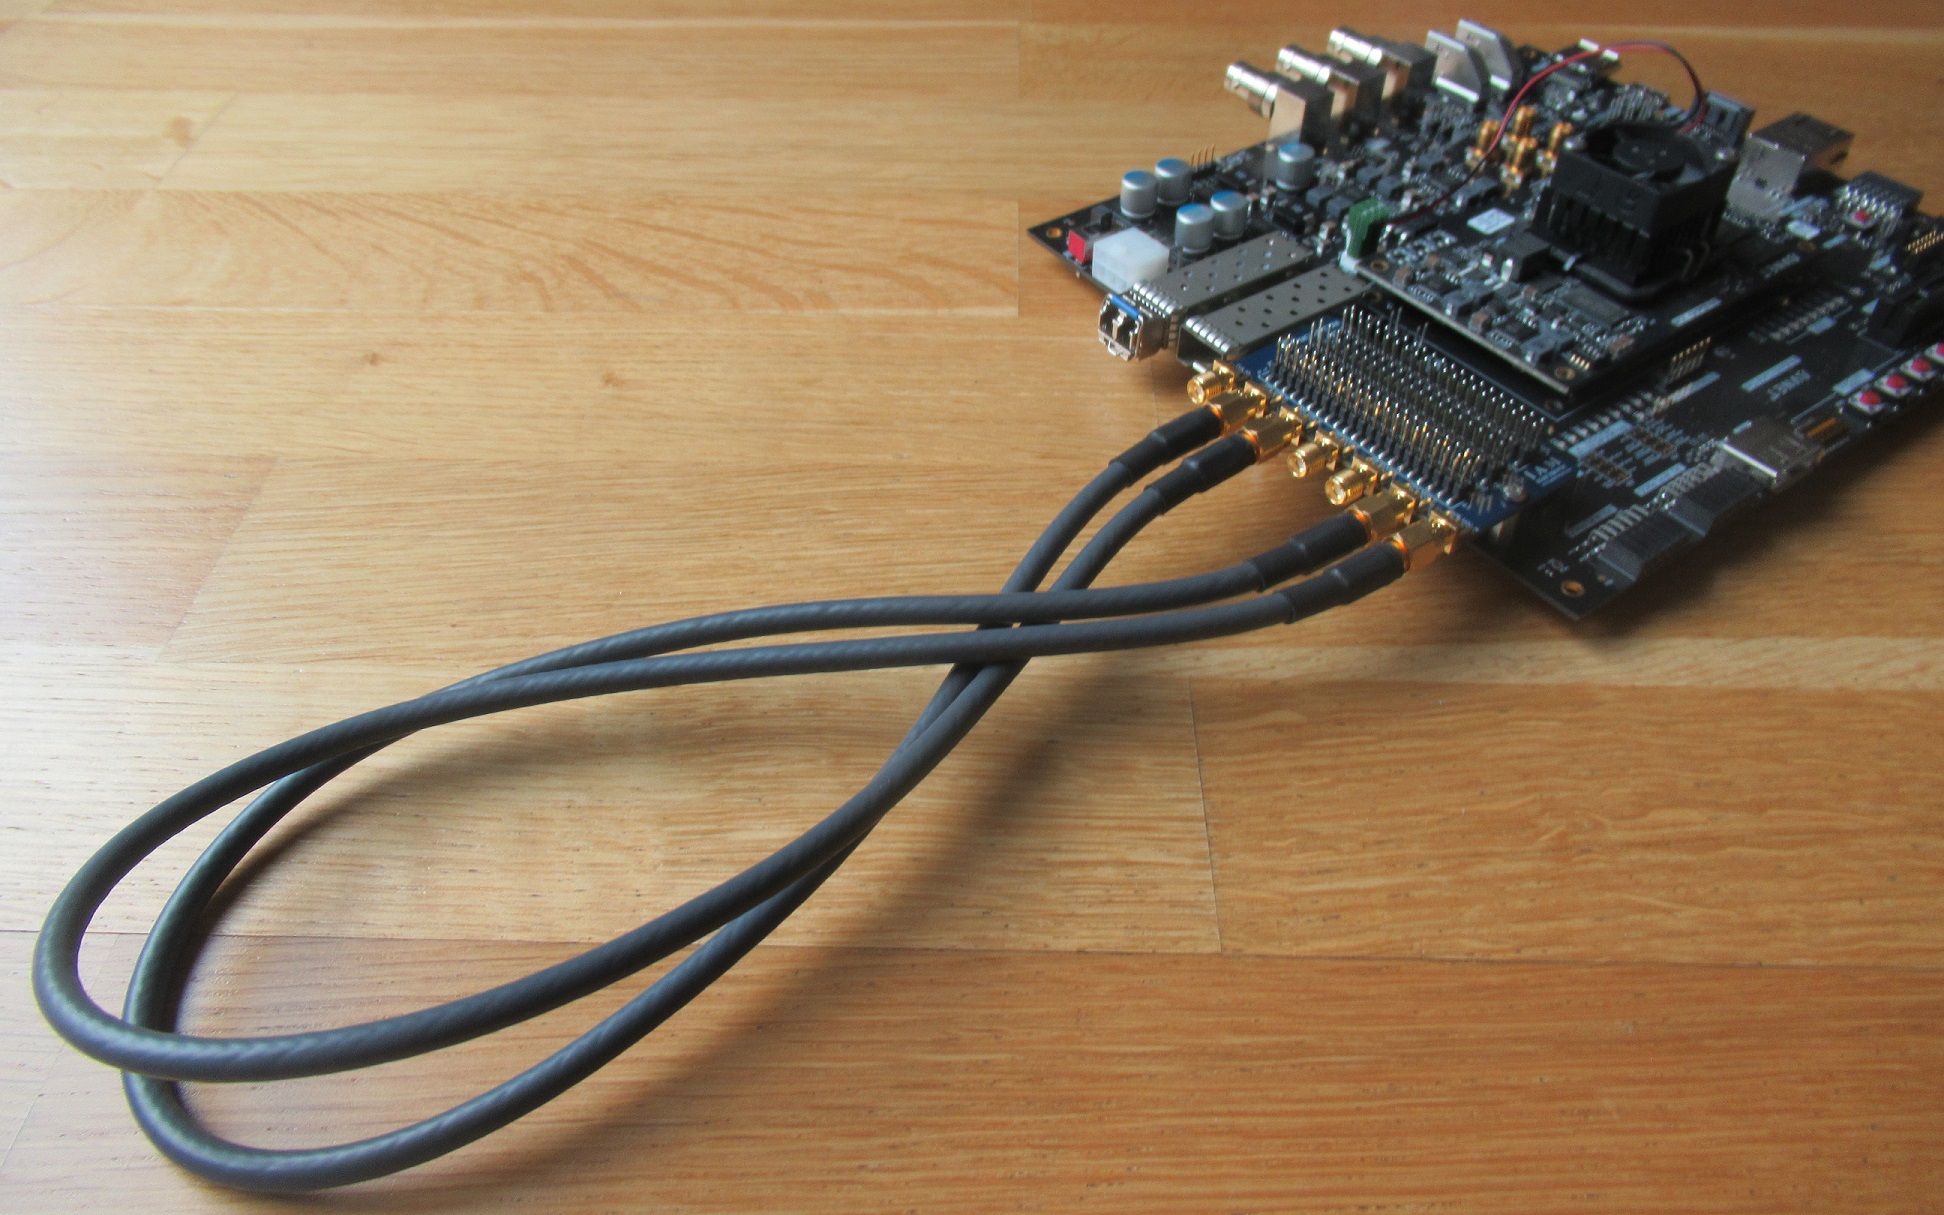 Loopback connection with the FMC LPC Pin Header Board